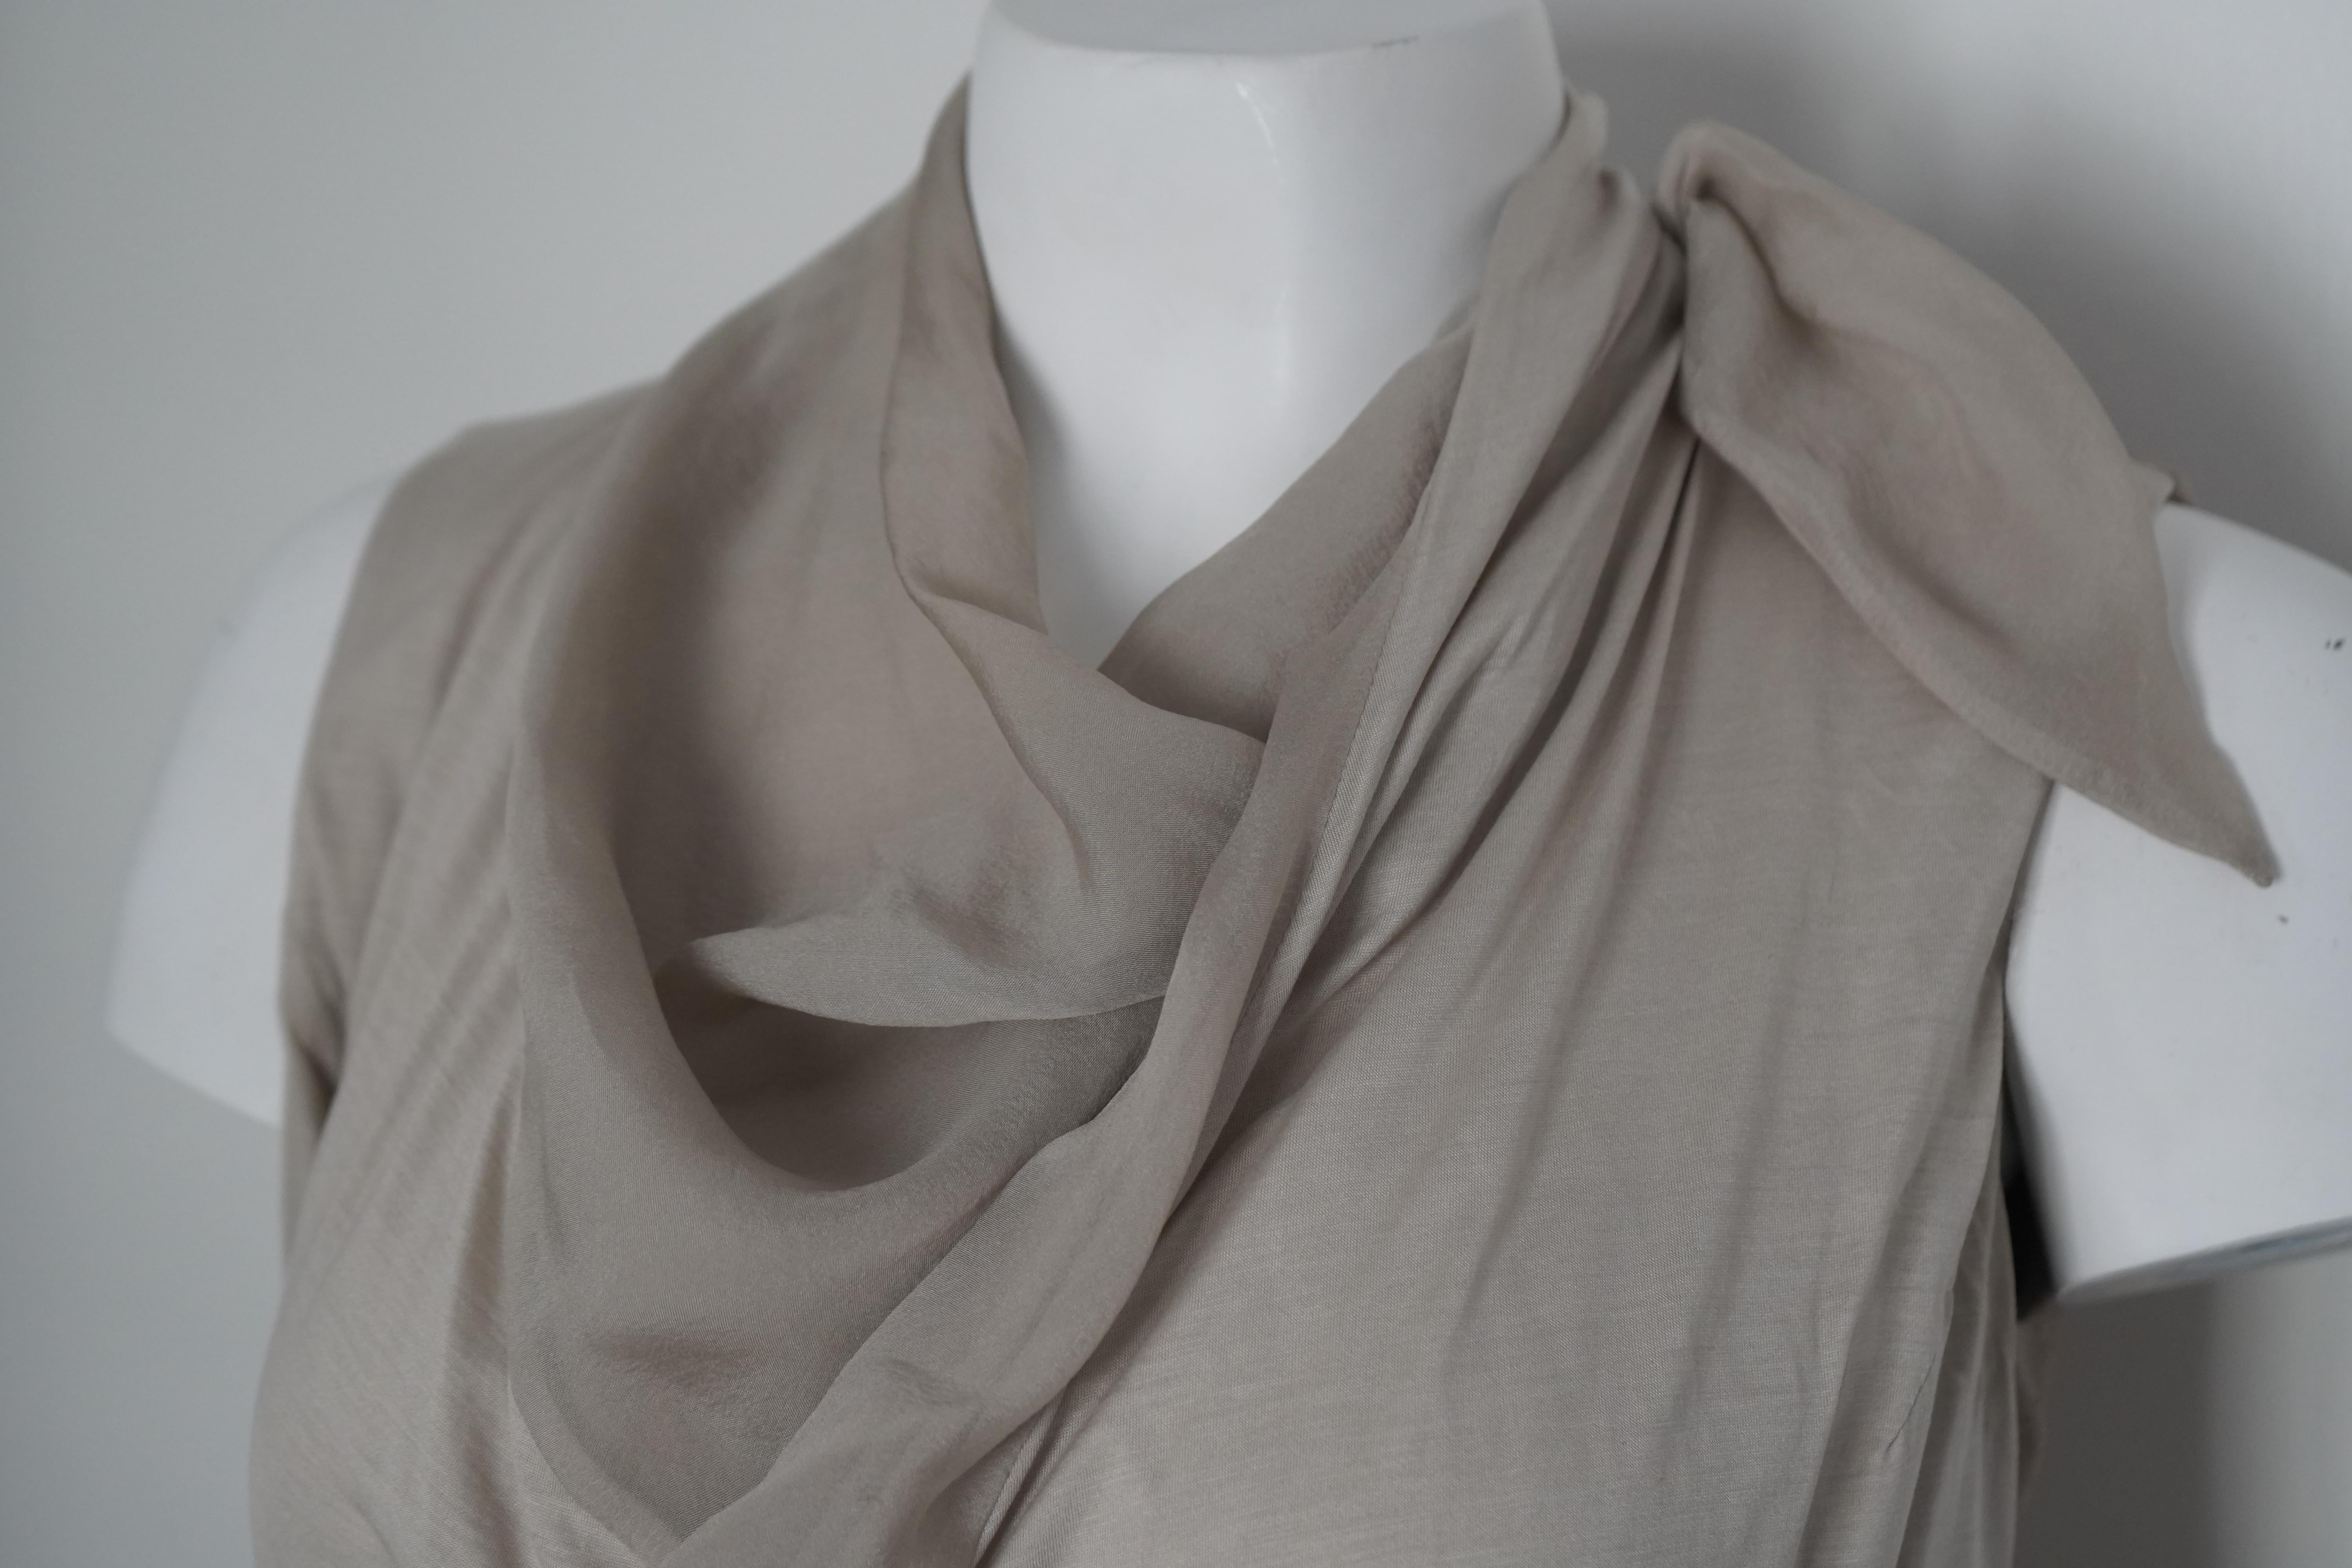 Rick Owens
Made of silk, lamb leather, & rayon
Can be worn multiple ways
Asymmetrical cut 
Great condition 
Size: IT42/US8

